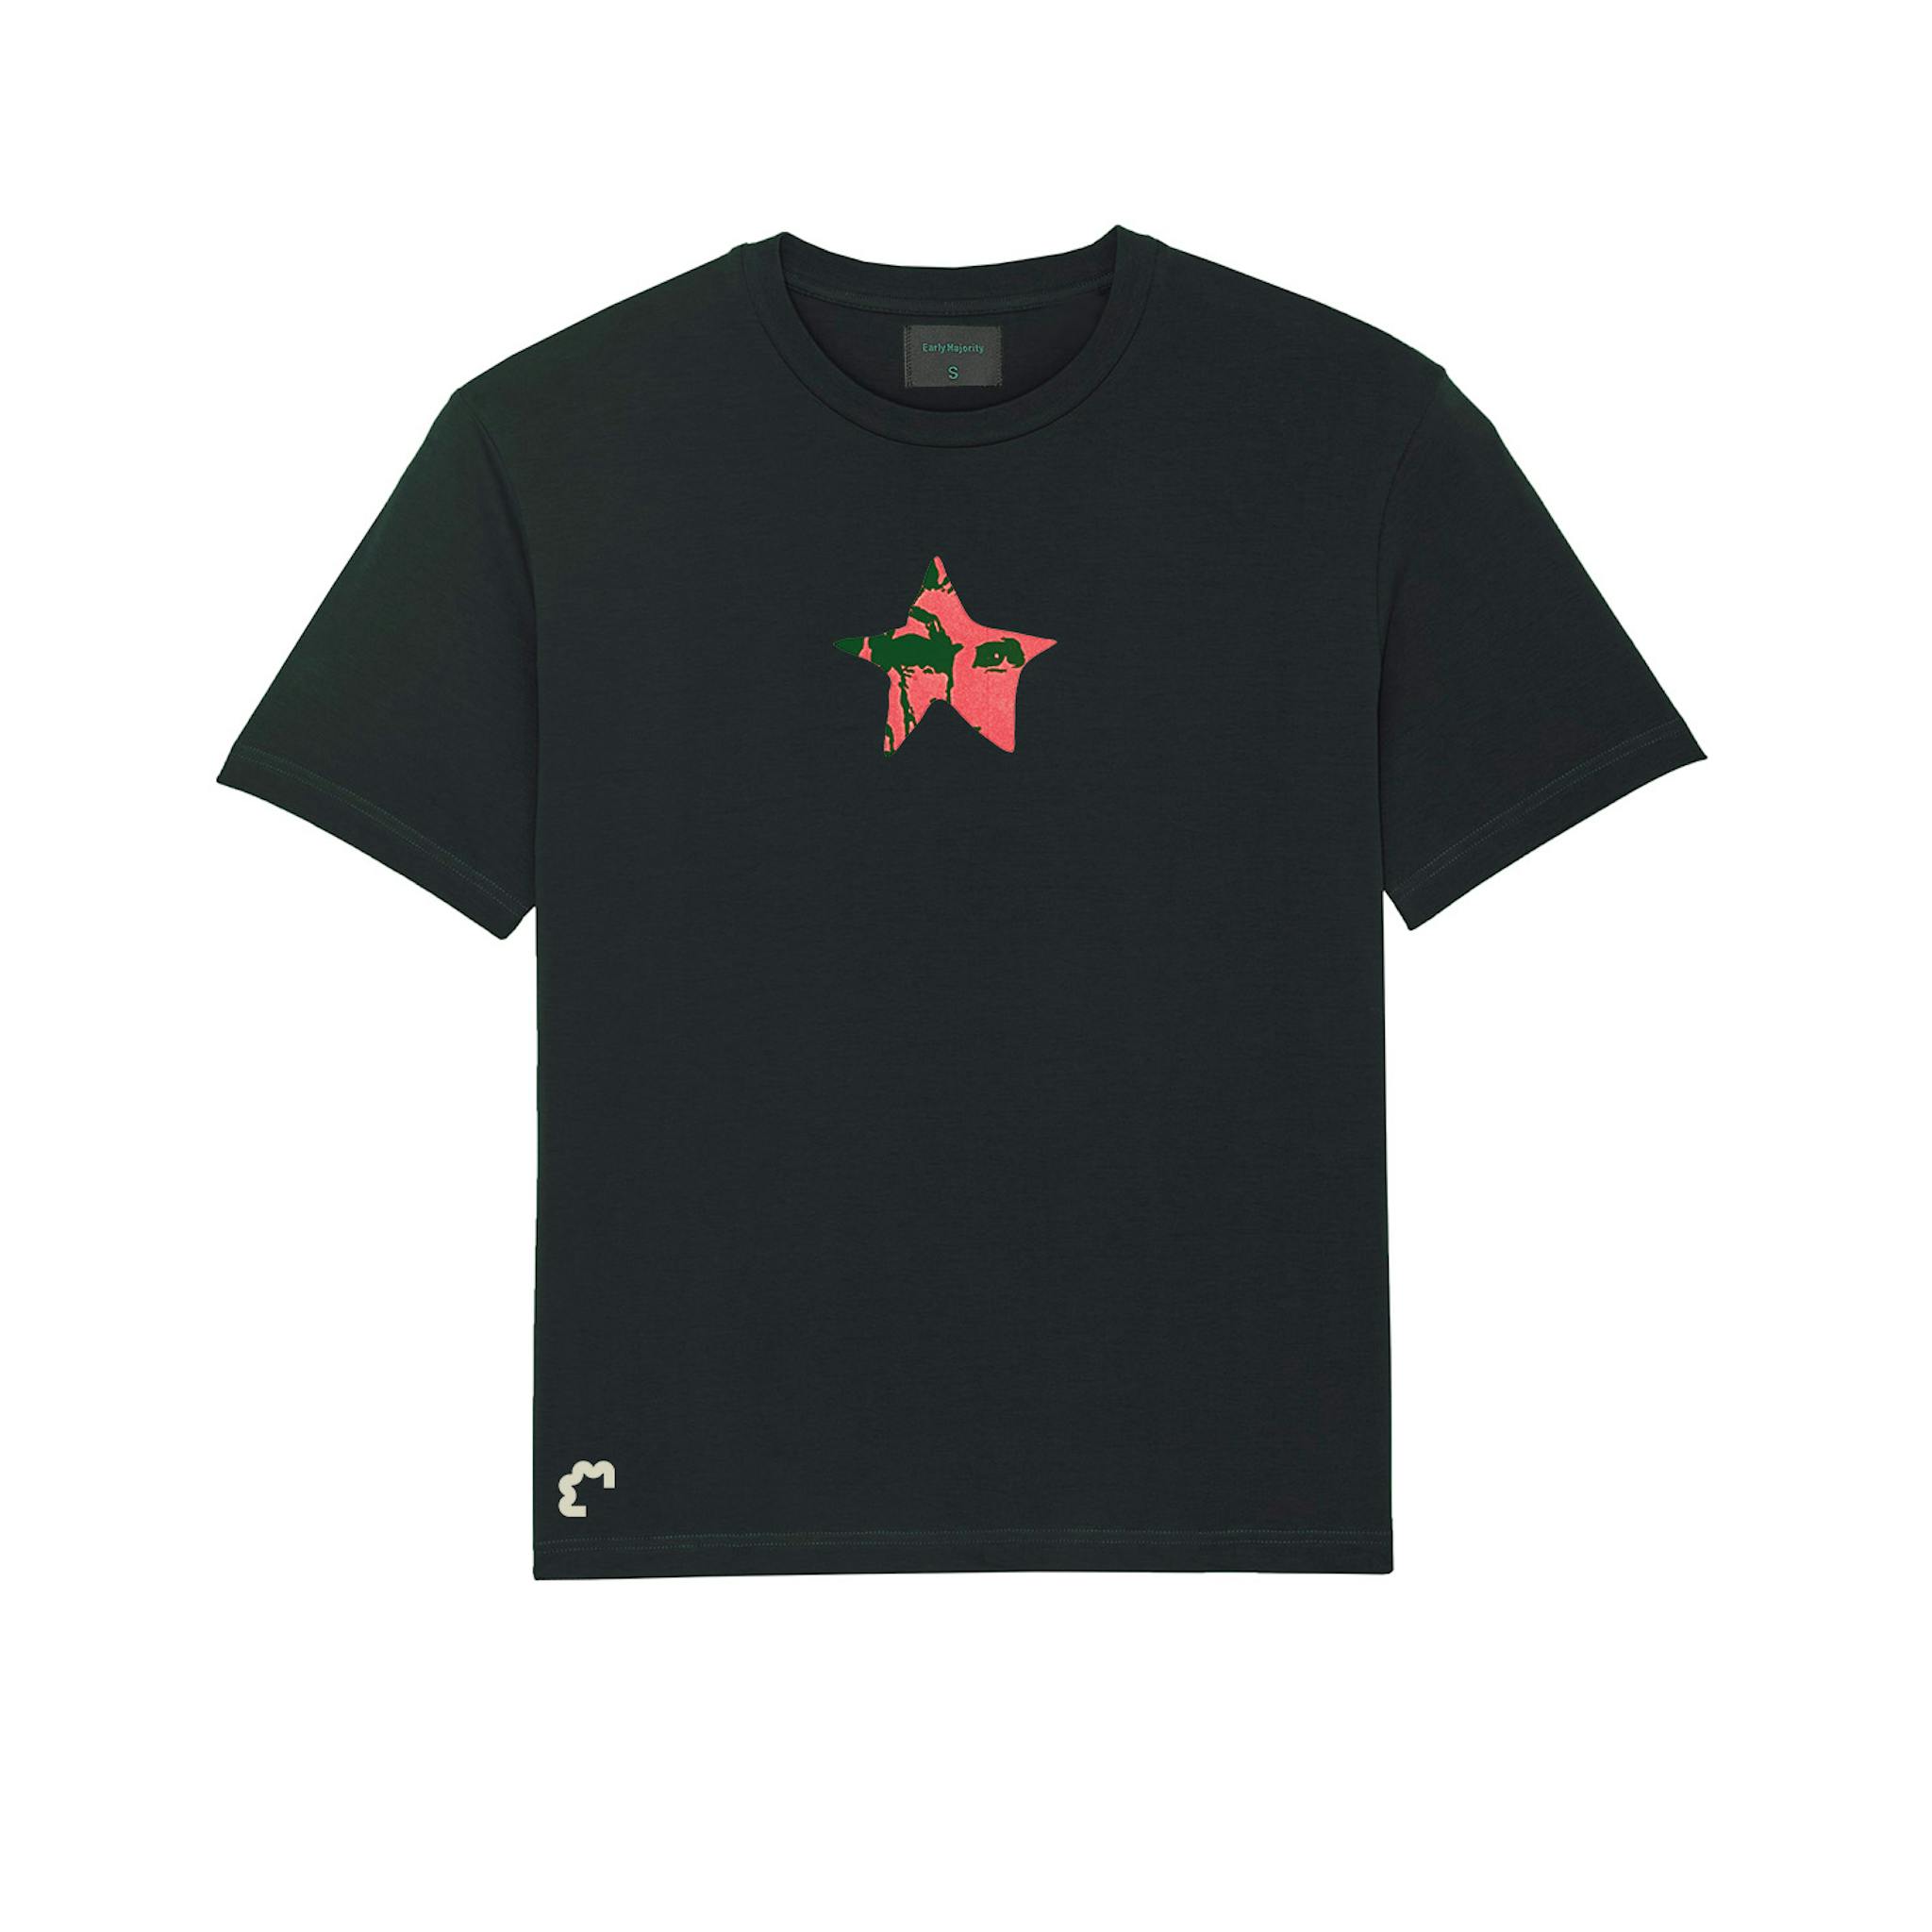 A black T-shirt with a small red star graphic on the front and a small white emblem on the lower right side.